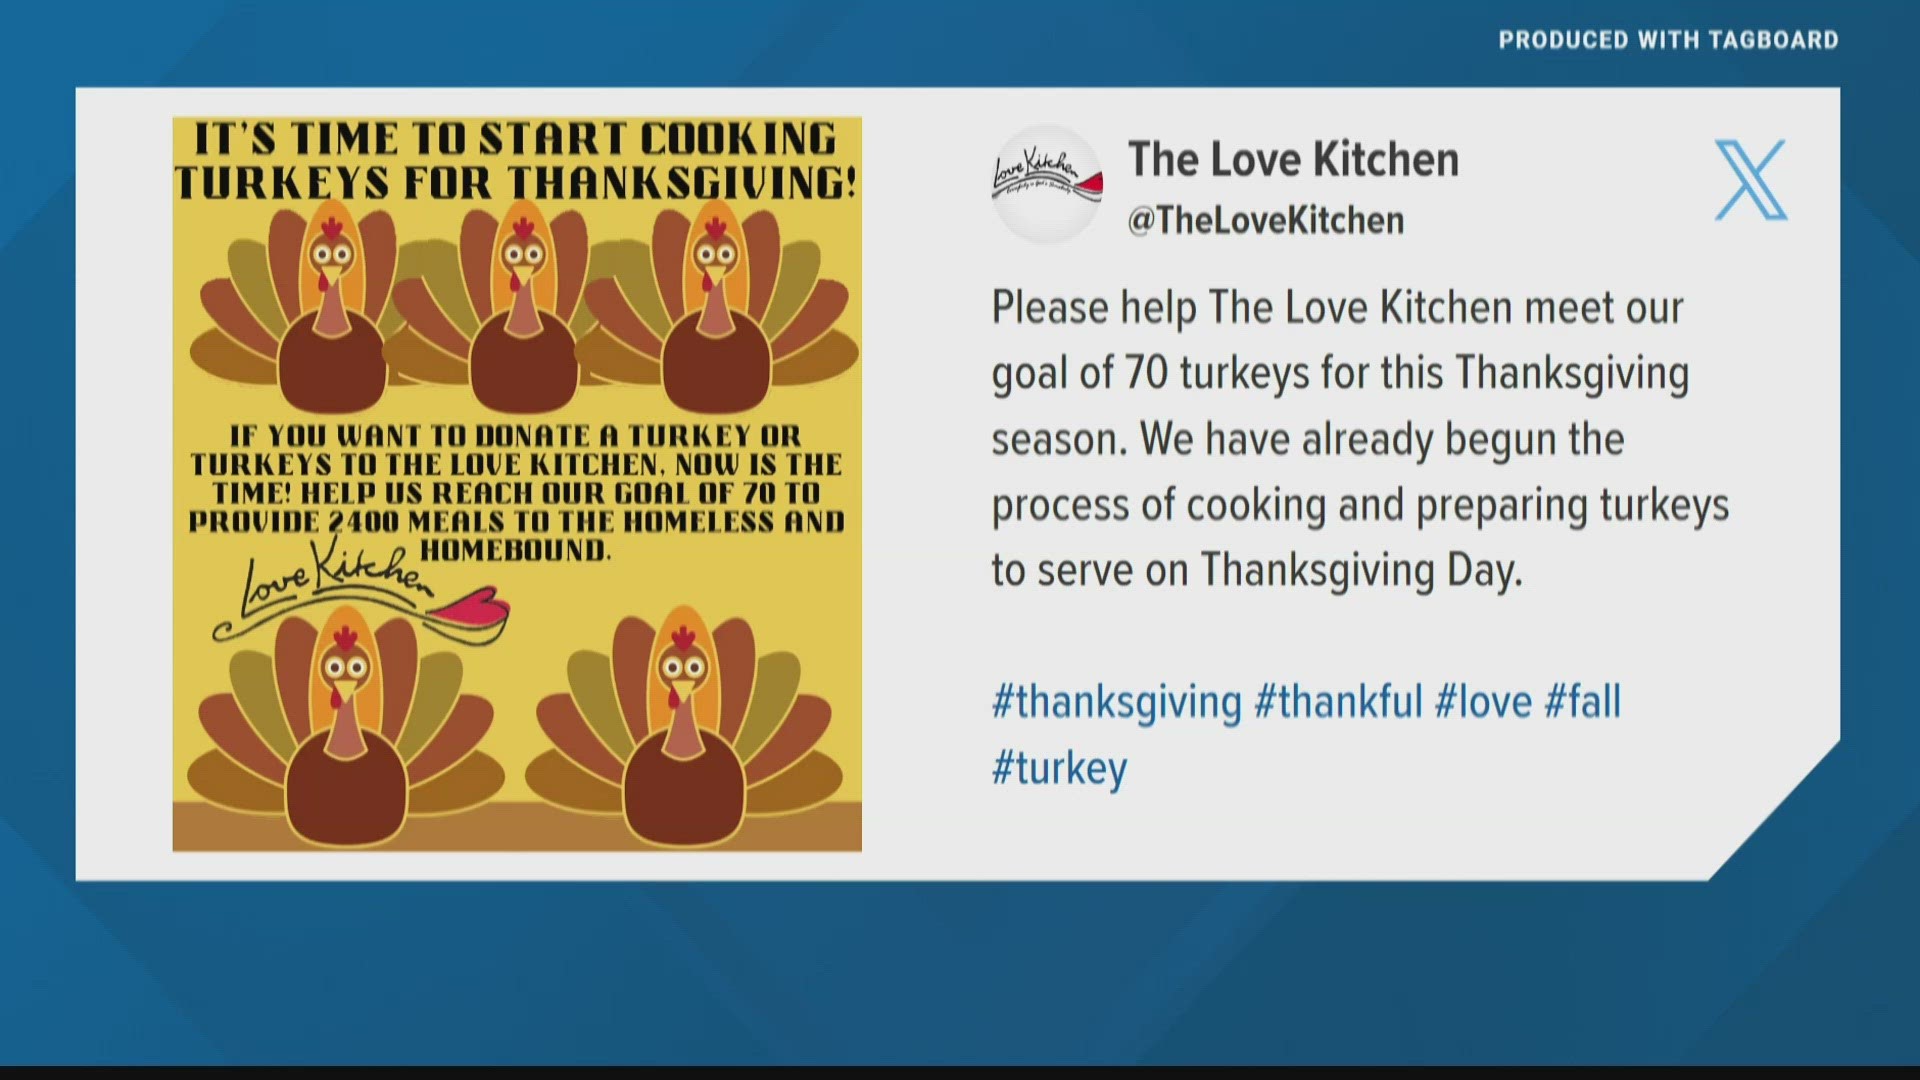 The non-profit is asking the public to help them reach their goal of 70 donated turkeys.